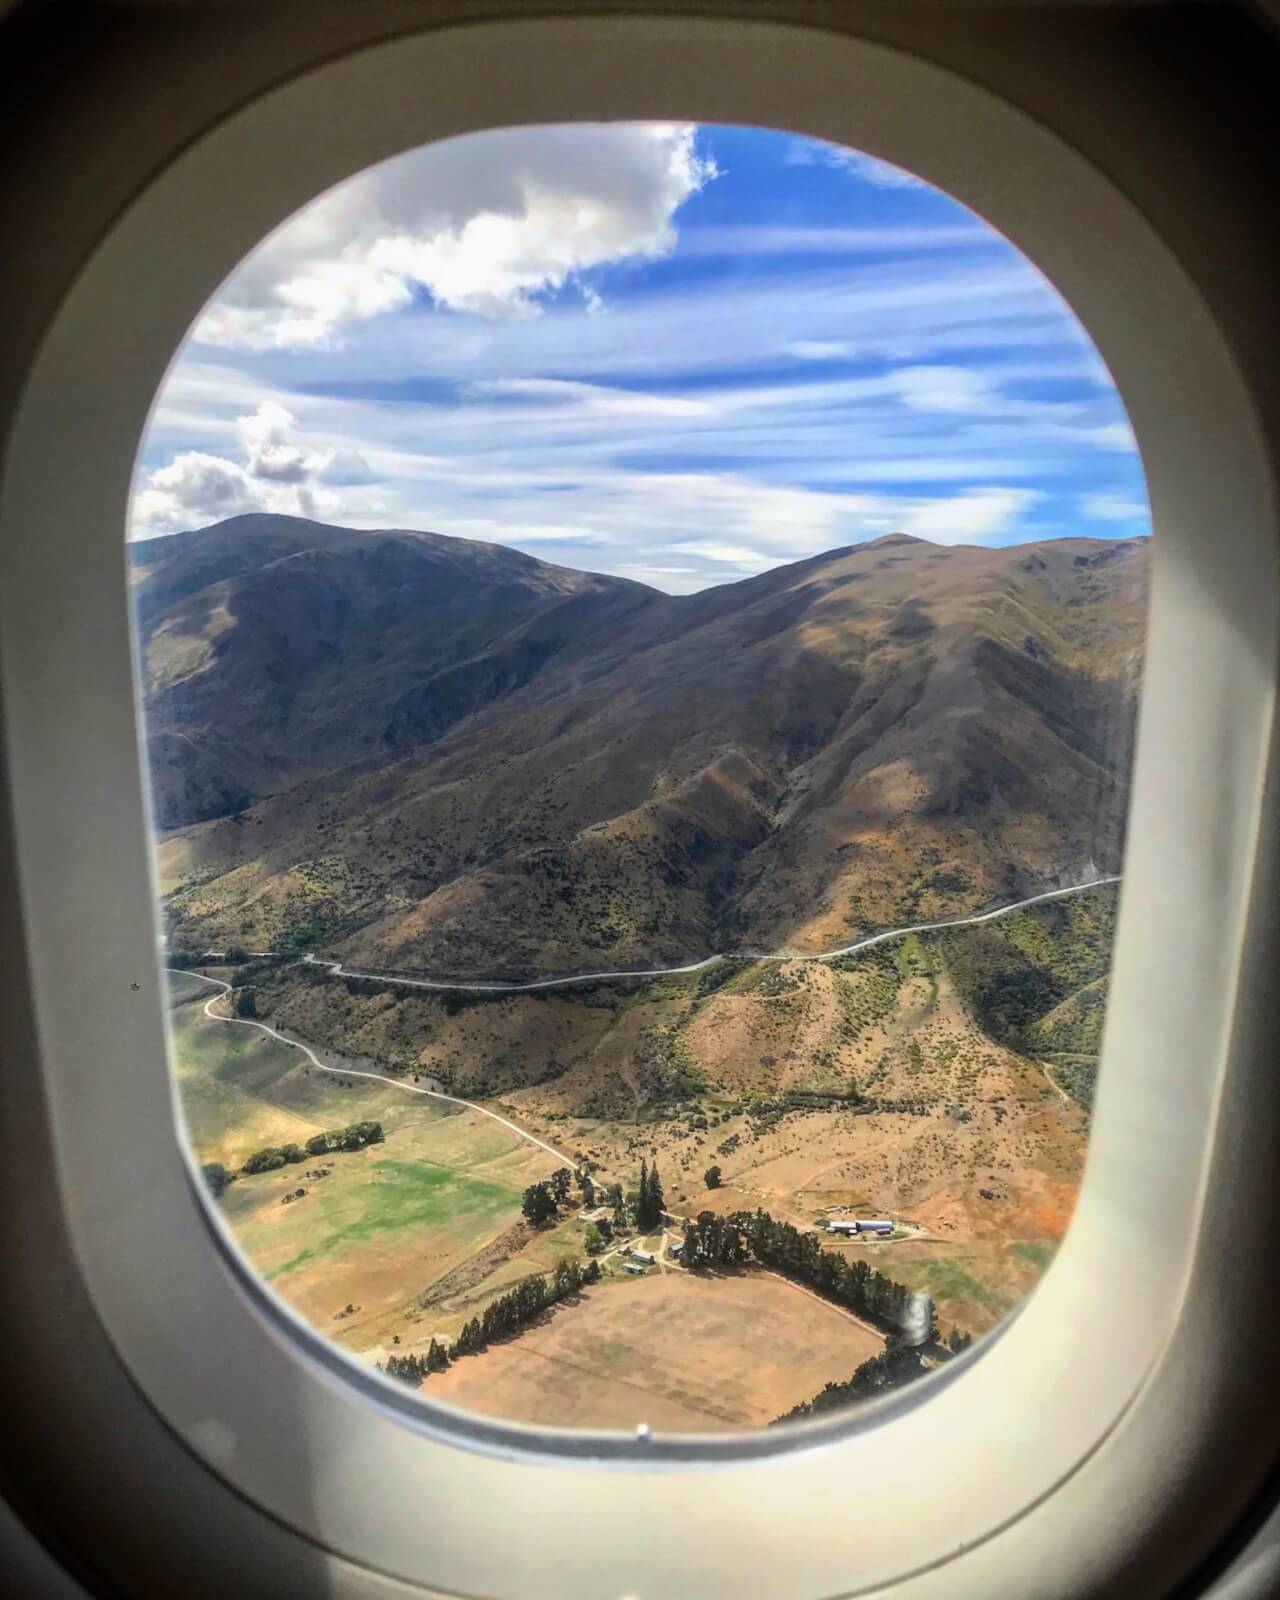 Hayley Lewis - A Lovely Planet - Queenstown - New Zealand